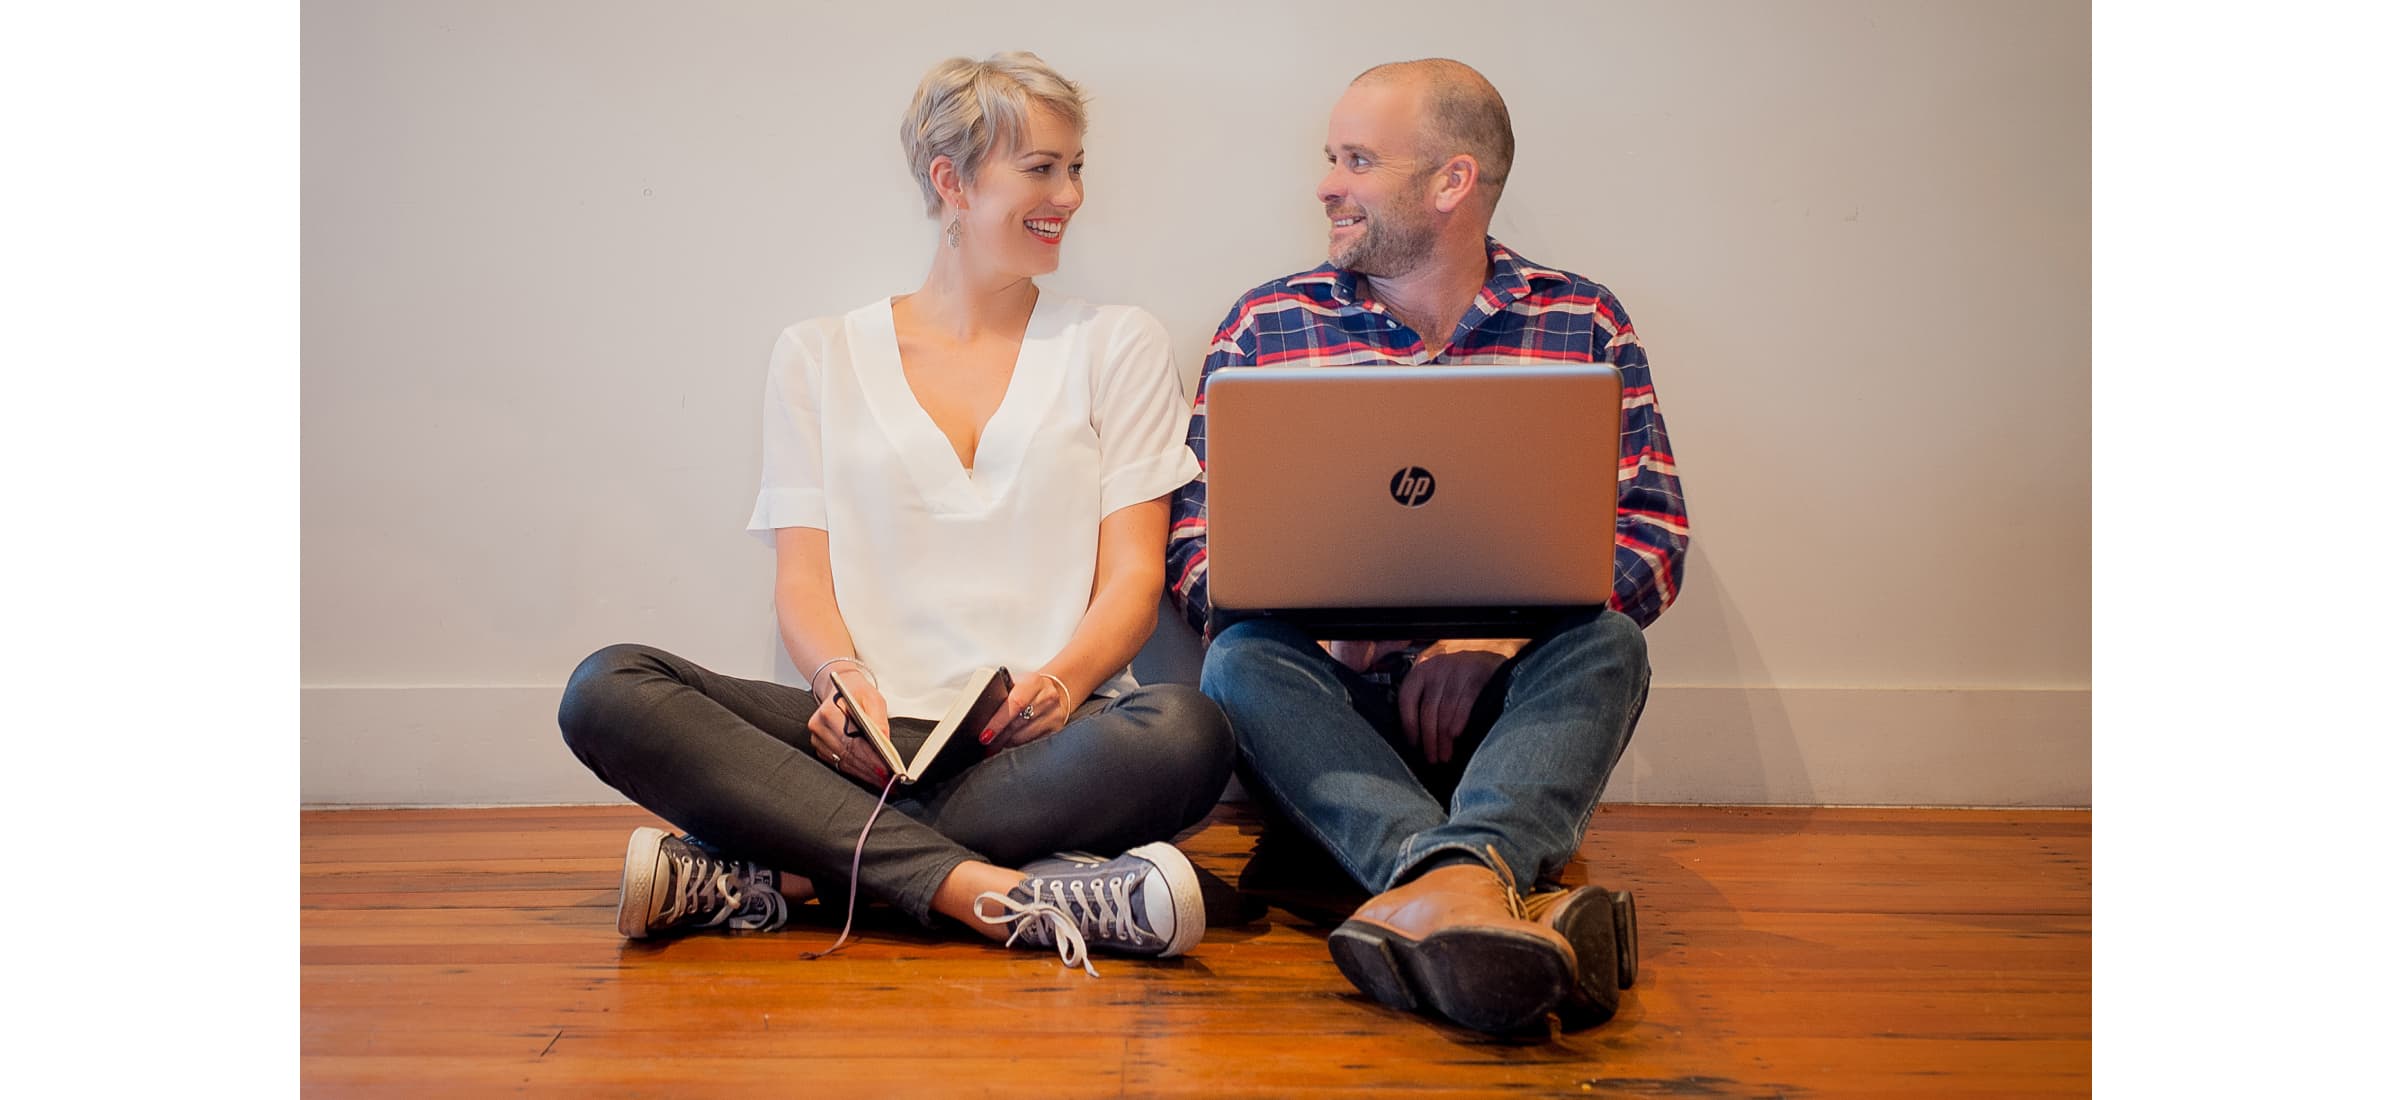 The Experience Collective founders Rosie and Nick Rogers sitting beside each other on a wooden floor, smiling.